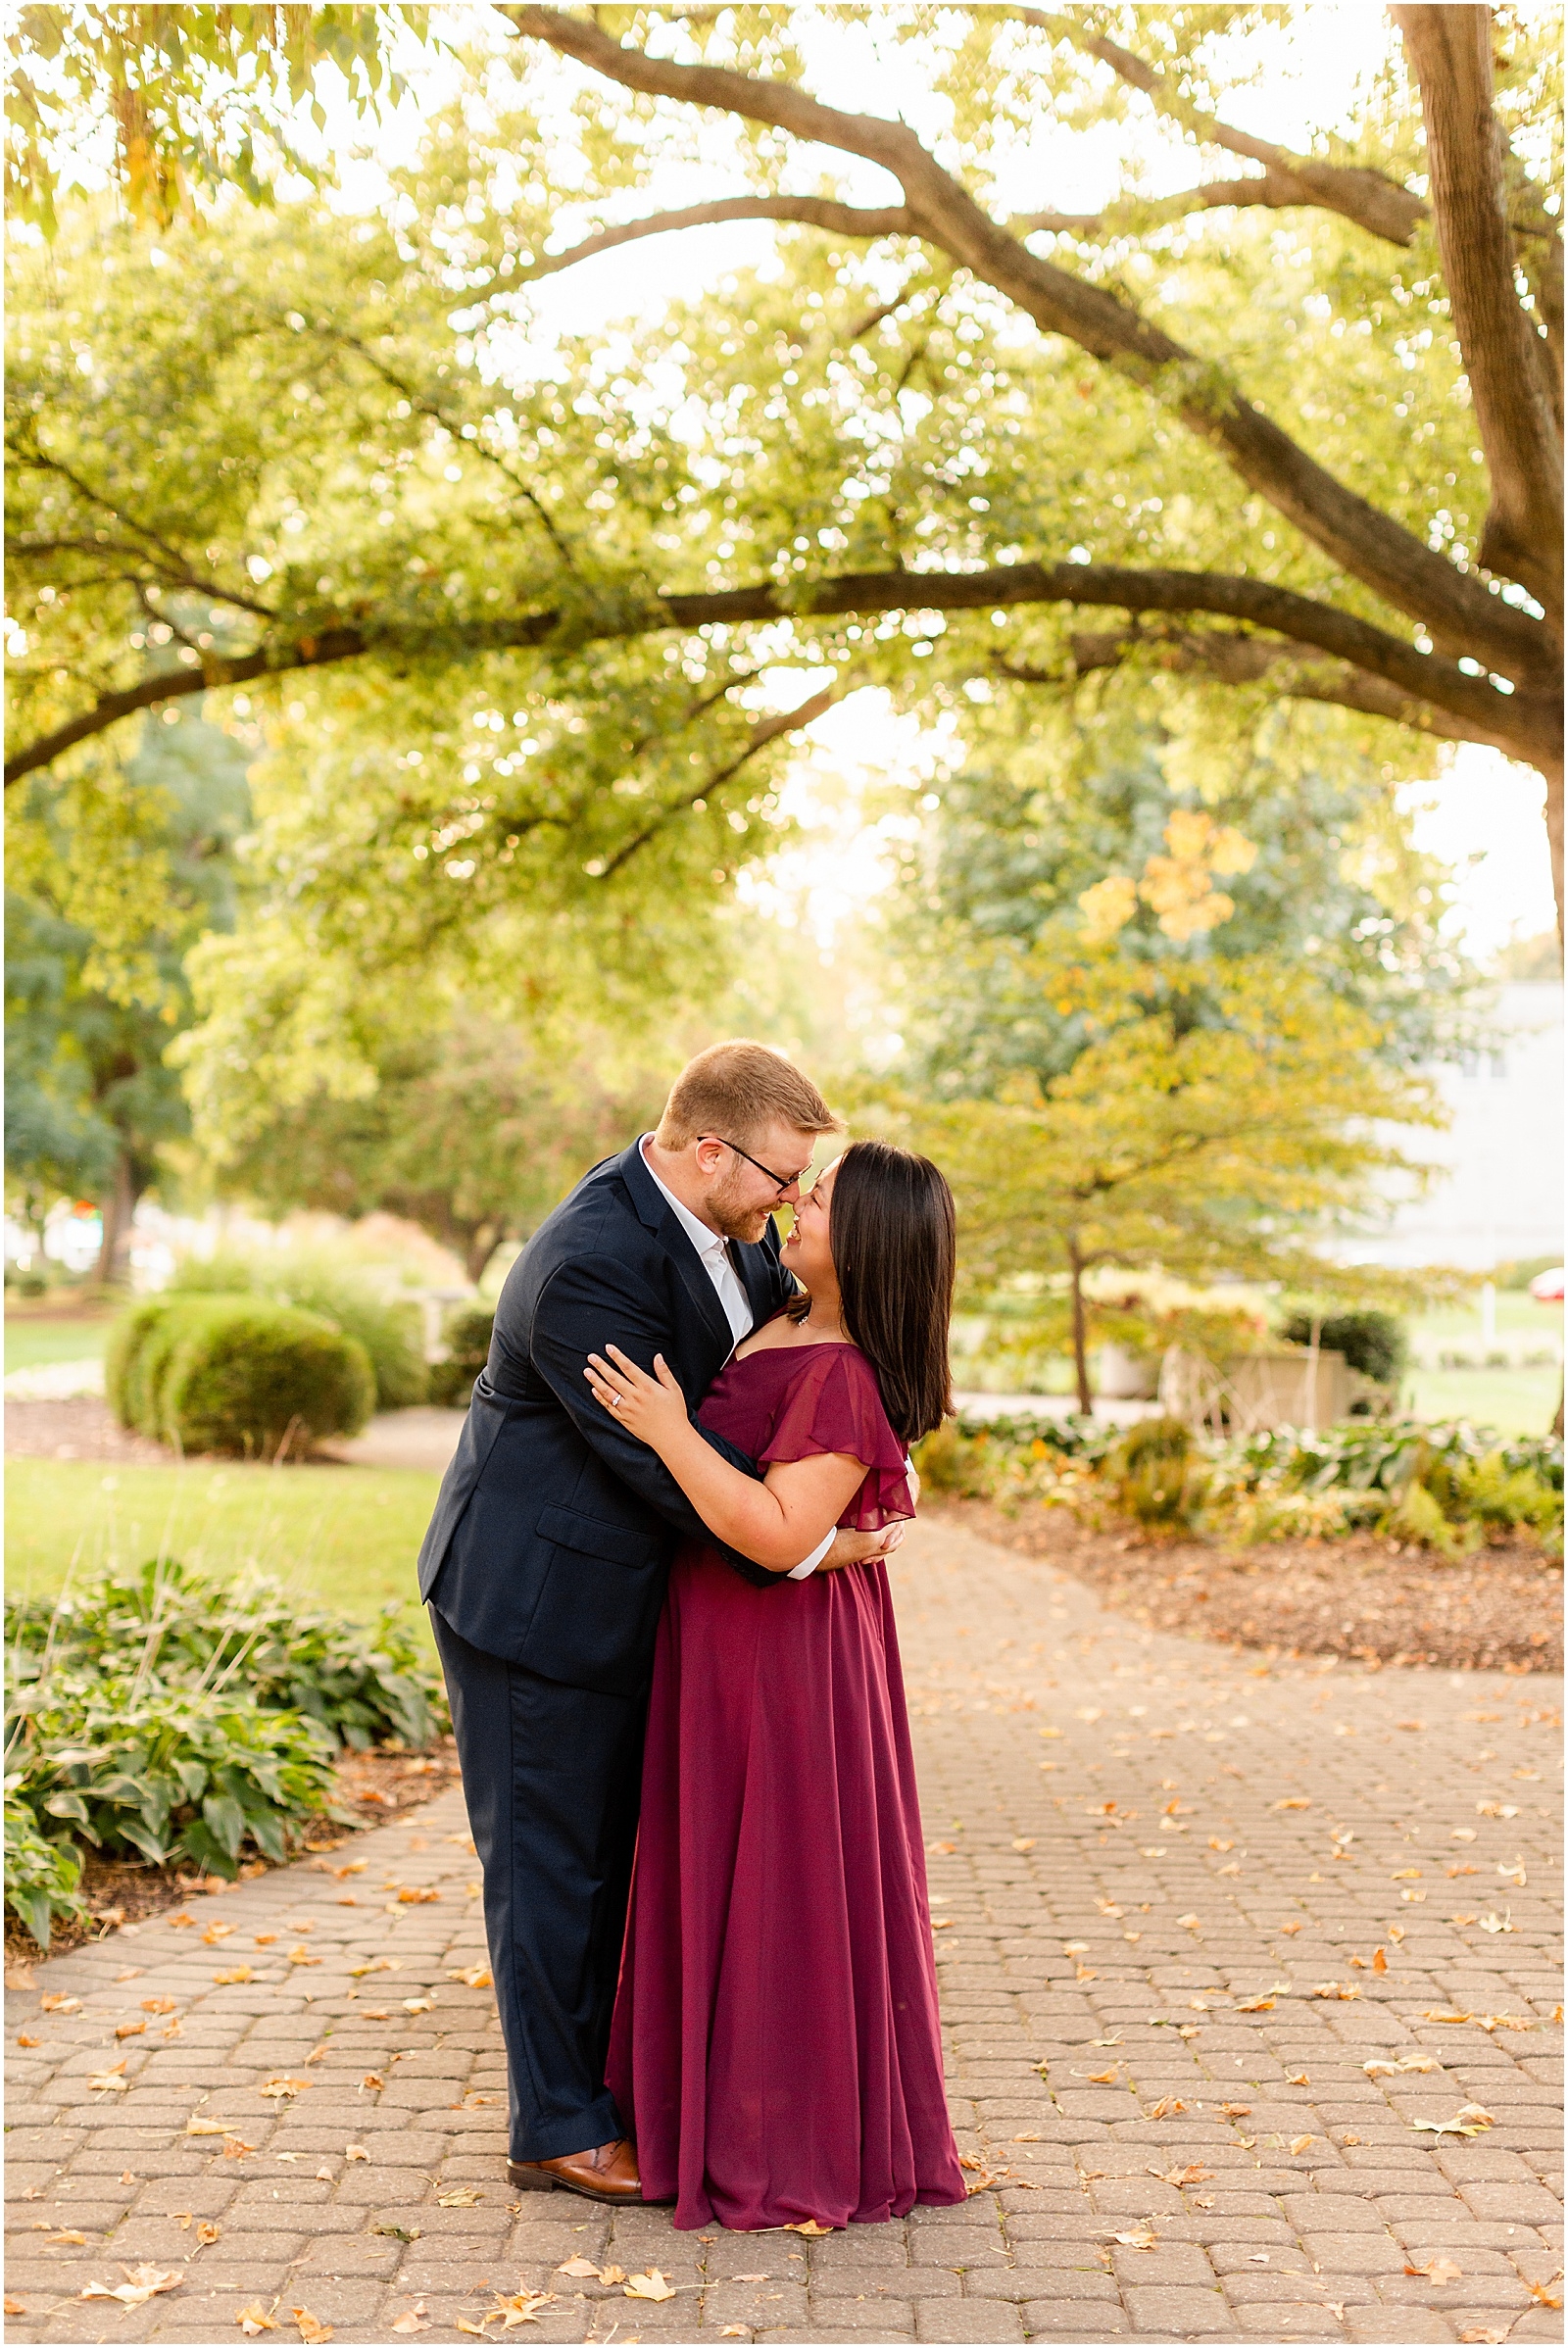 Mariah and Andrew's Session at U of E | Bret and Brandie Photography0013.jpg